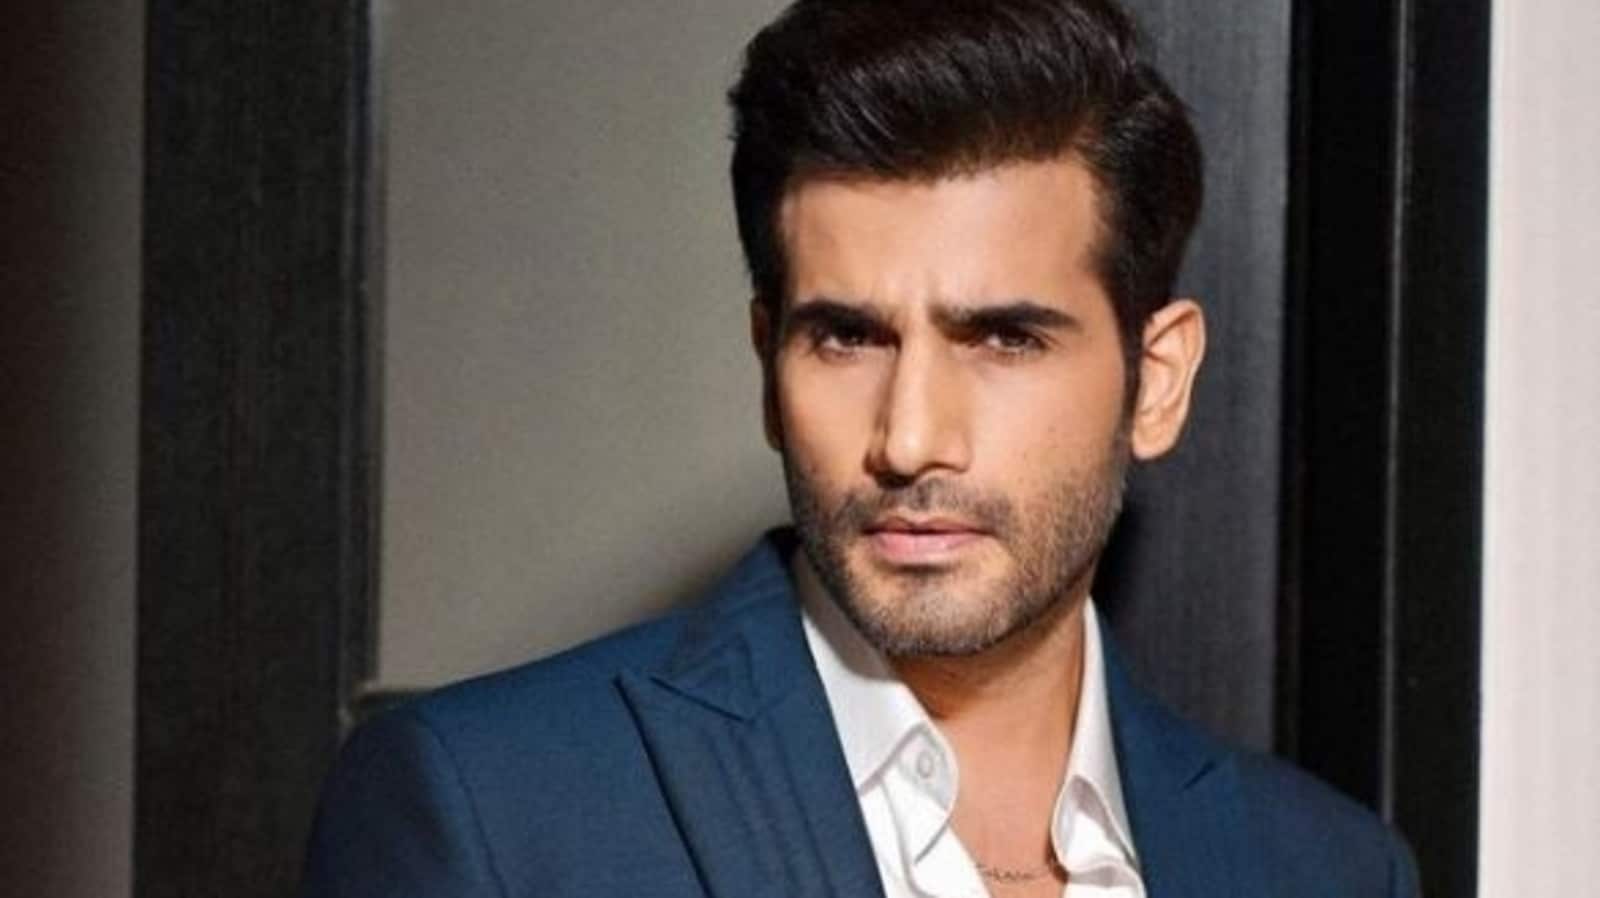 Karan Tacker on why he does not want to work on shows: 'TV tends to limit  you' - Hindustan Times